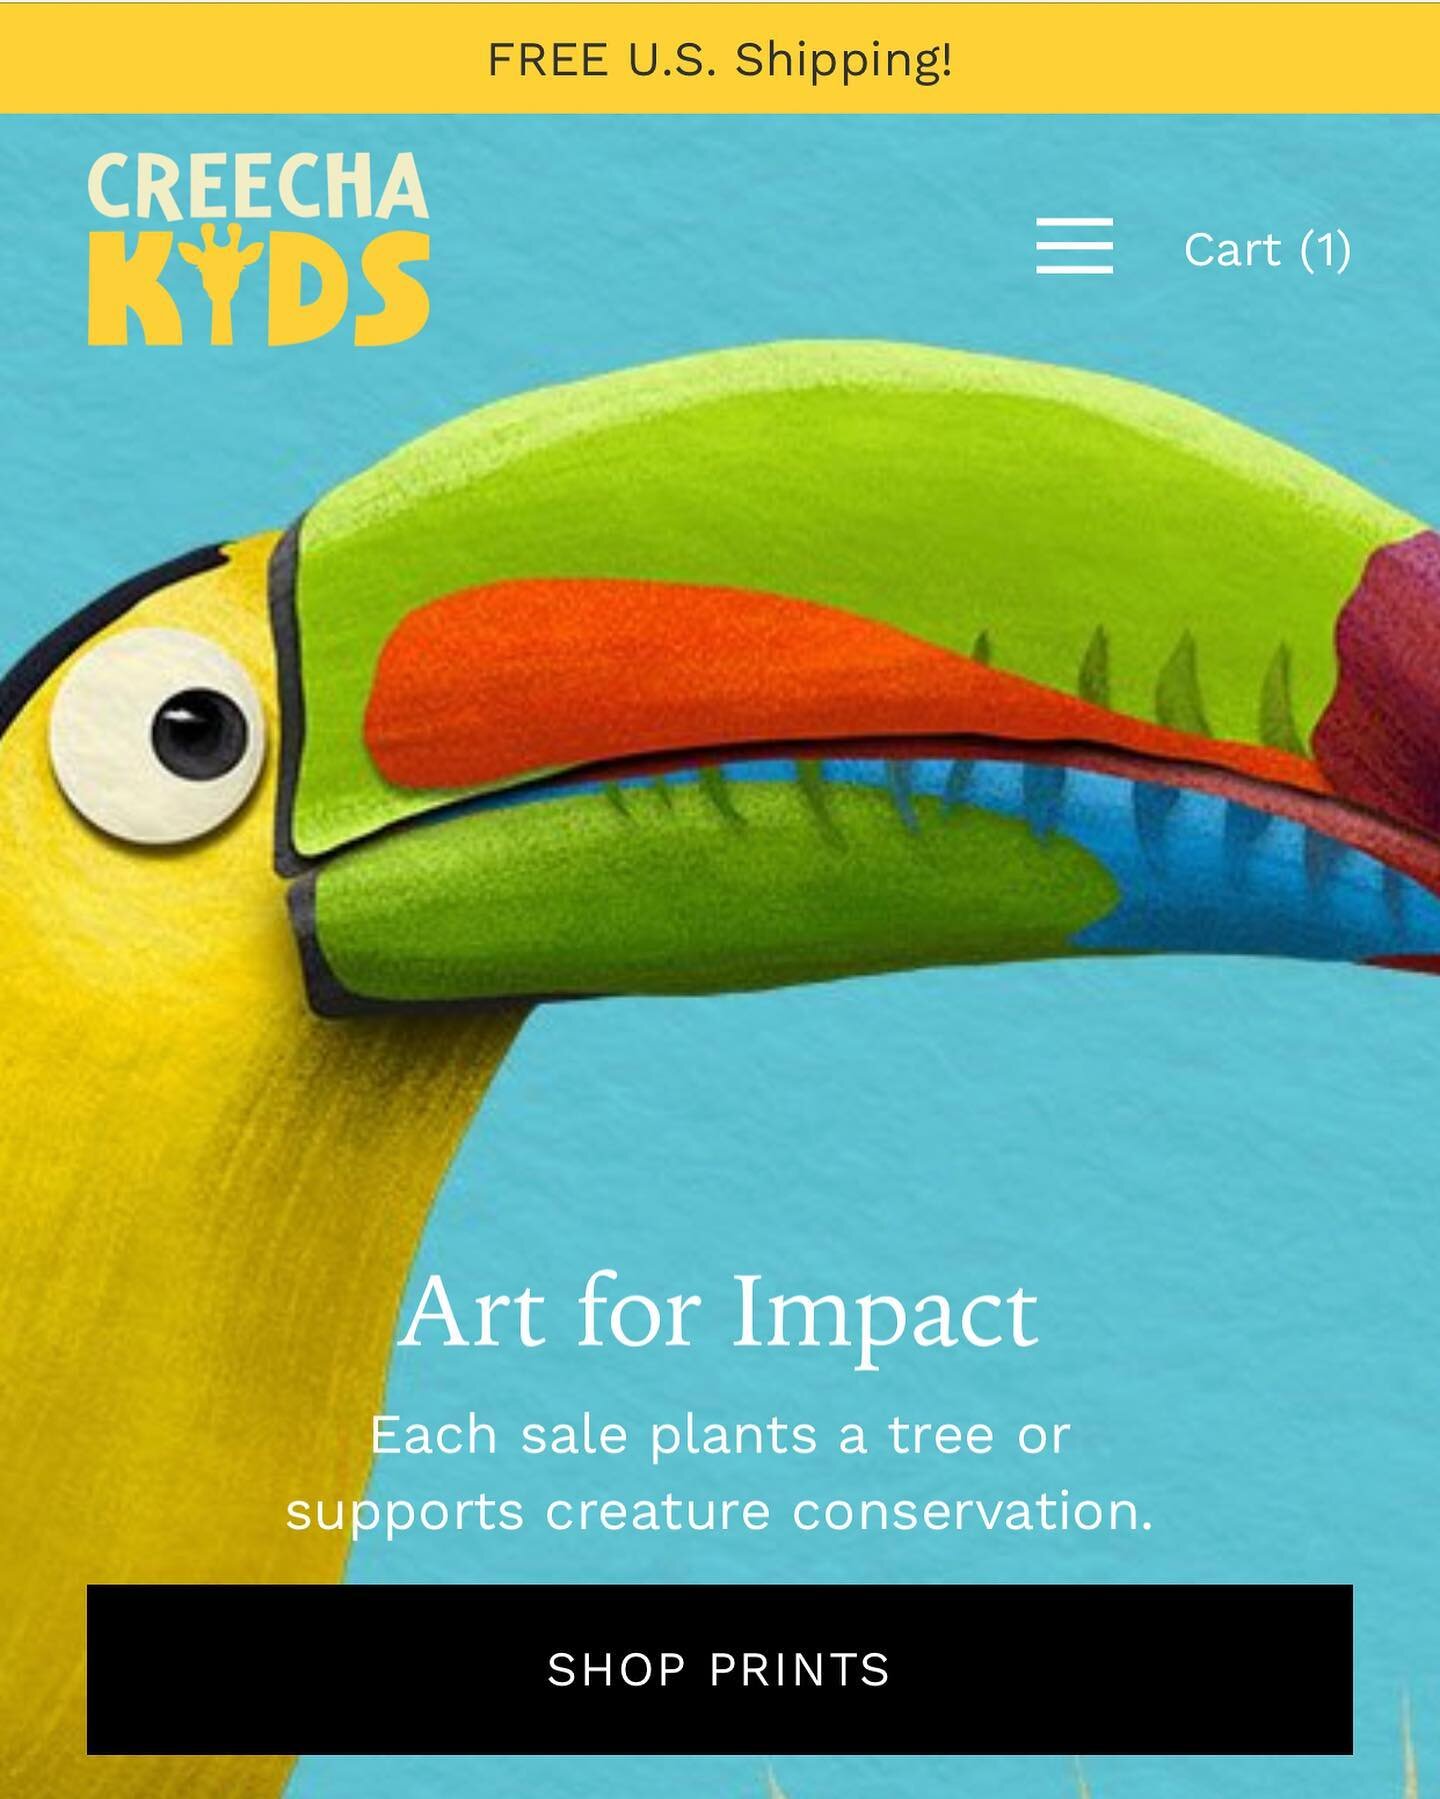 Hi Friends! We have been busily working on our new website, and we are almost ready! In fact we are launching Wednesday June 2nd!
We are going to be selling fine art prints of our artwork printed on sustainable and eco-friendly paper made from bamboo